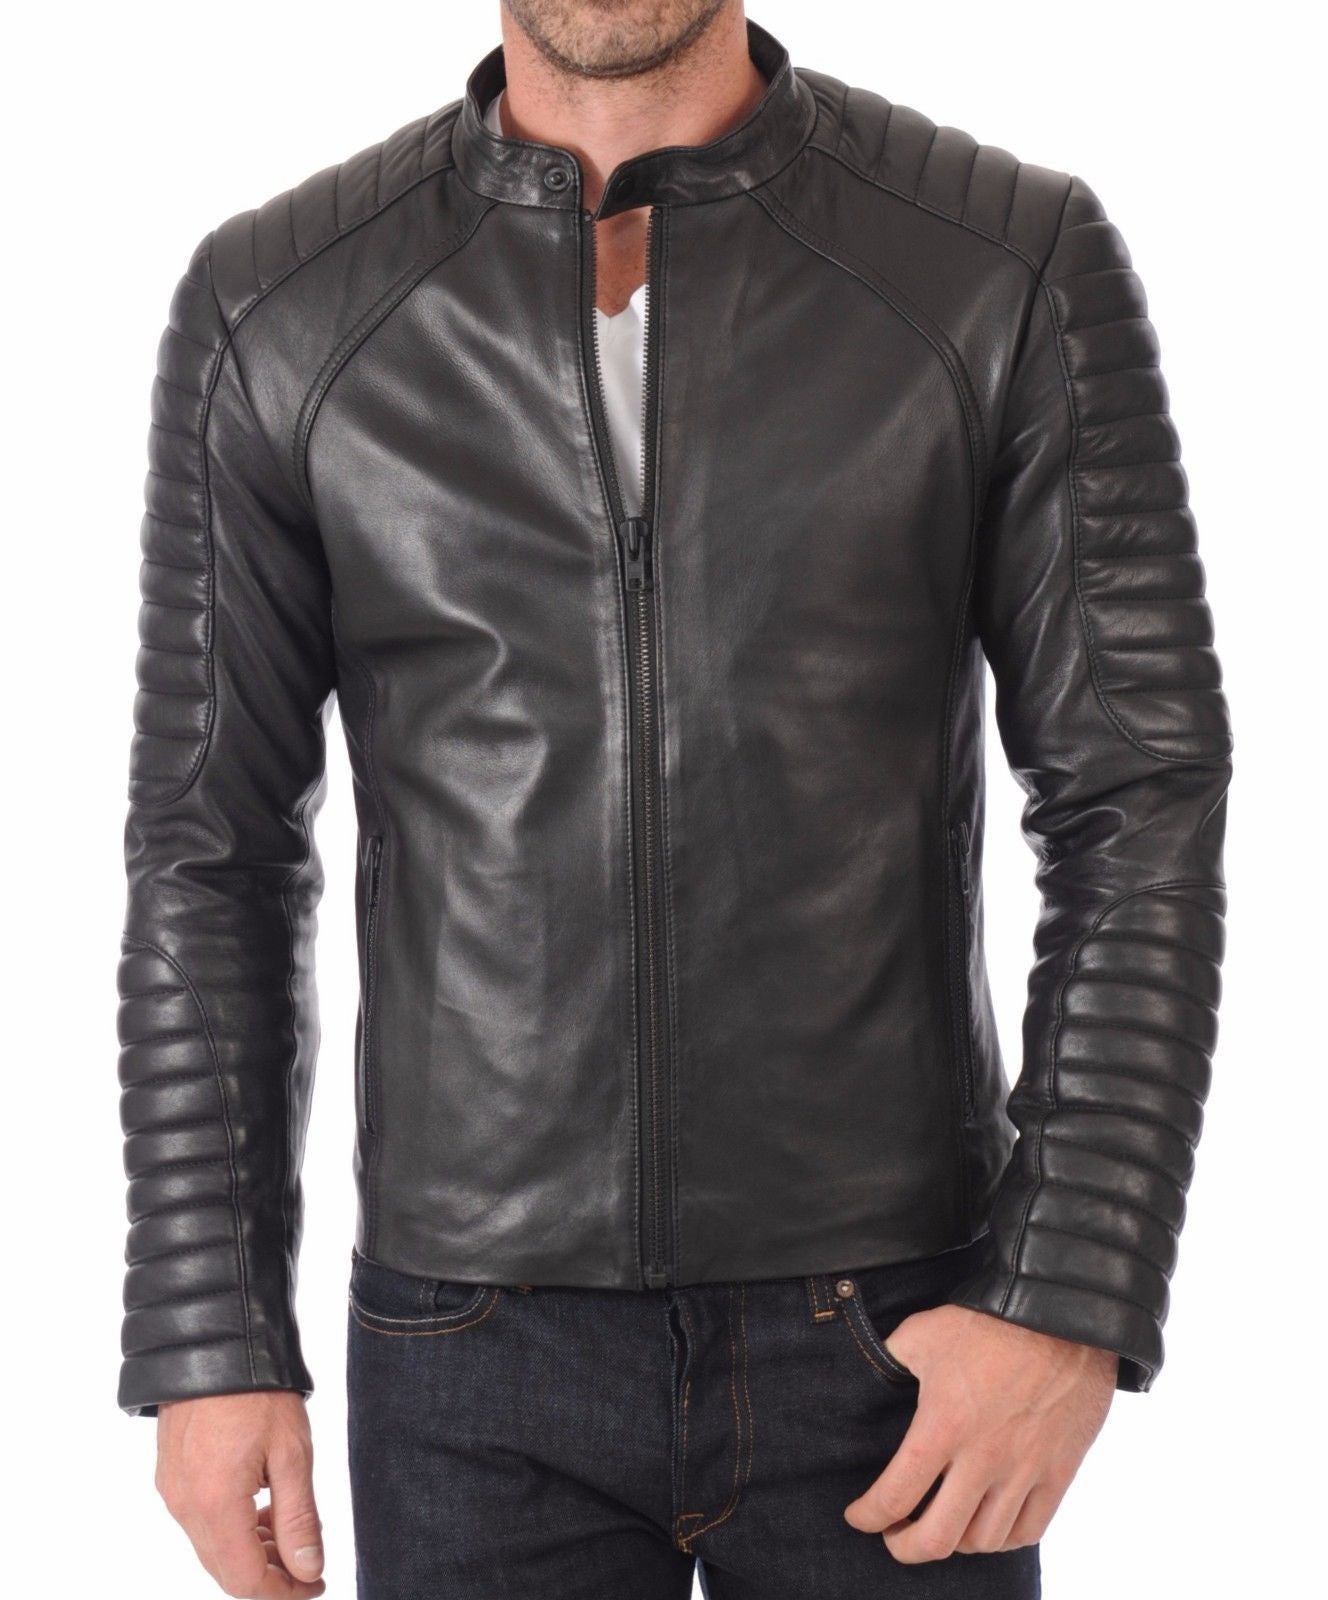 Men Club Black Real Leather Jacket – The Film Jackets